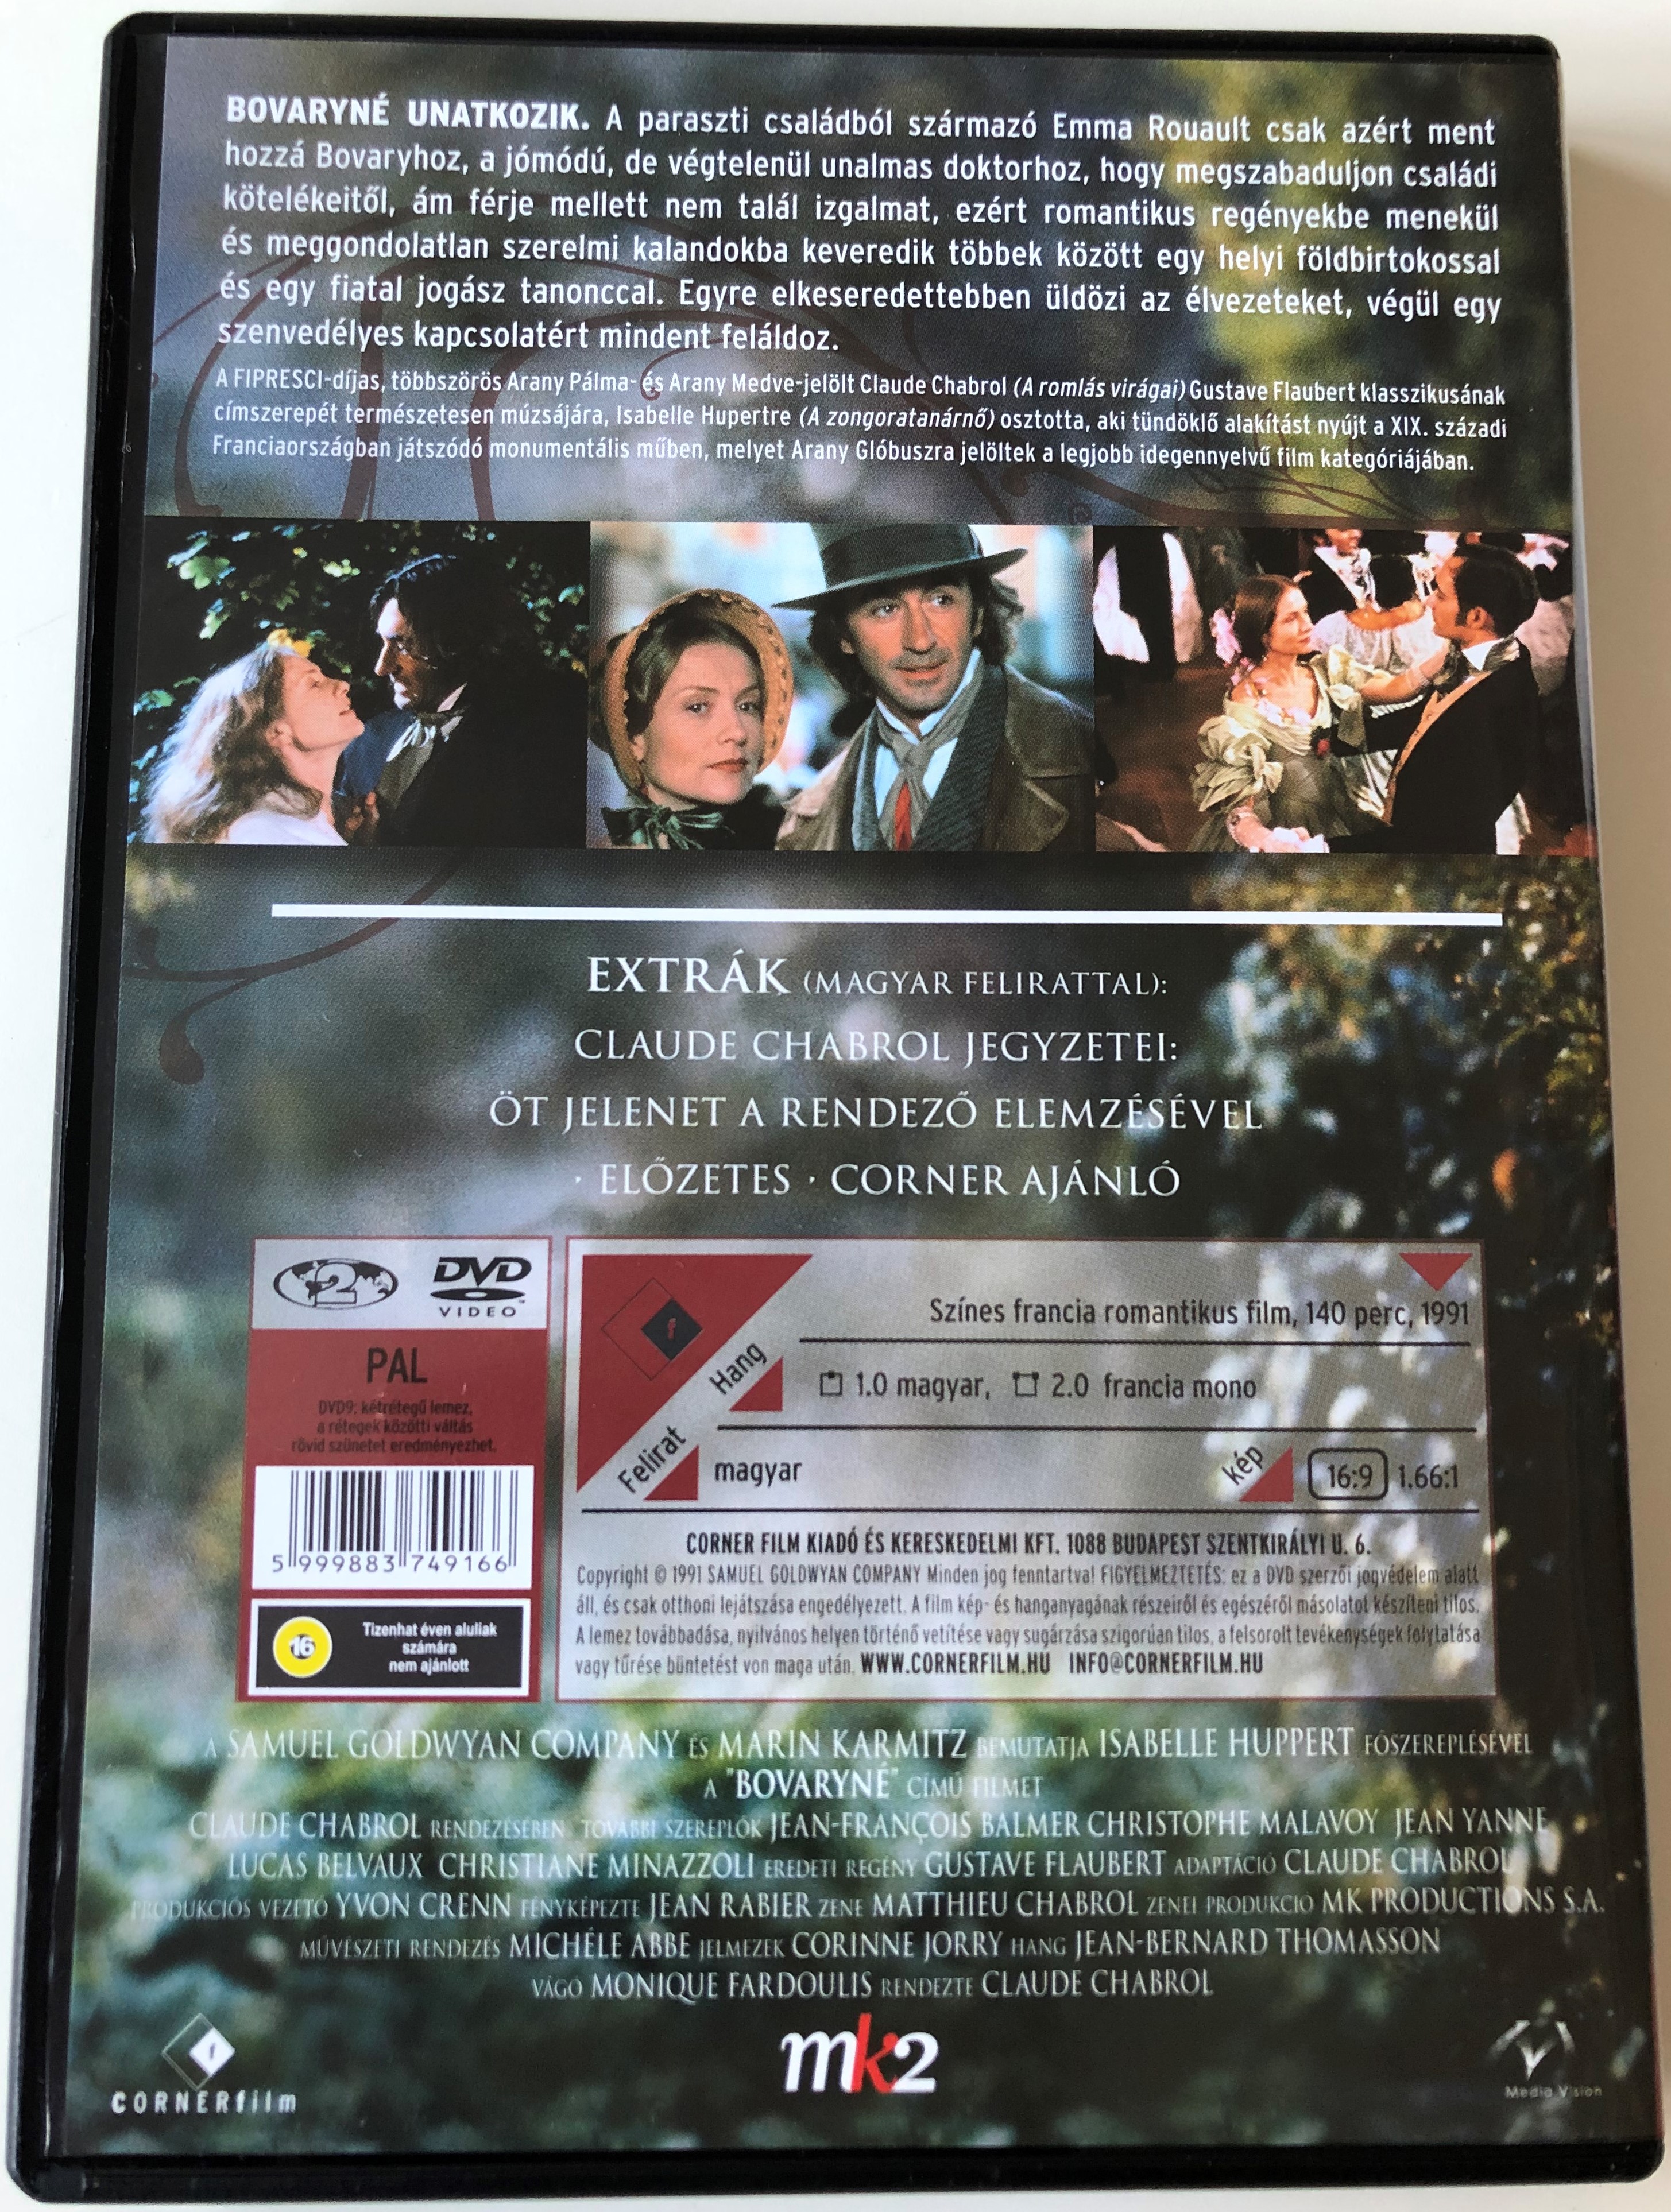 Madame Bovary DVD 1991 Bovaryné / Directed by Claude Chabrol / Starring:  Isabelle Huppert, Jean-Francois Balmer, Christophe Malavoy -  bibleinmylanguage